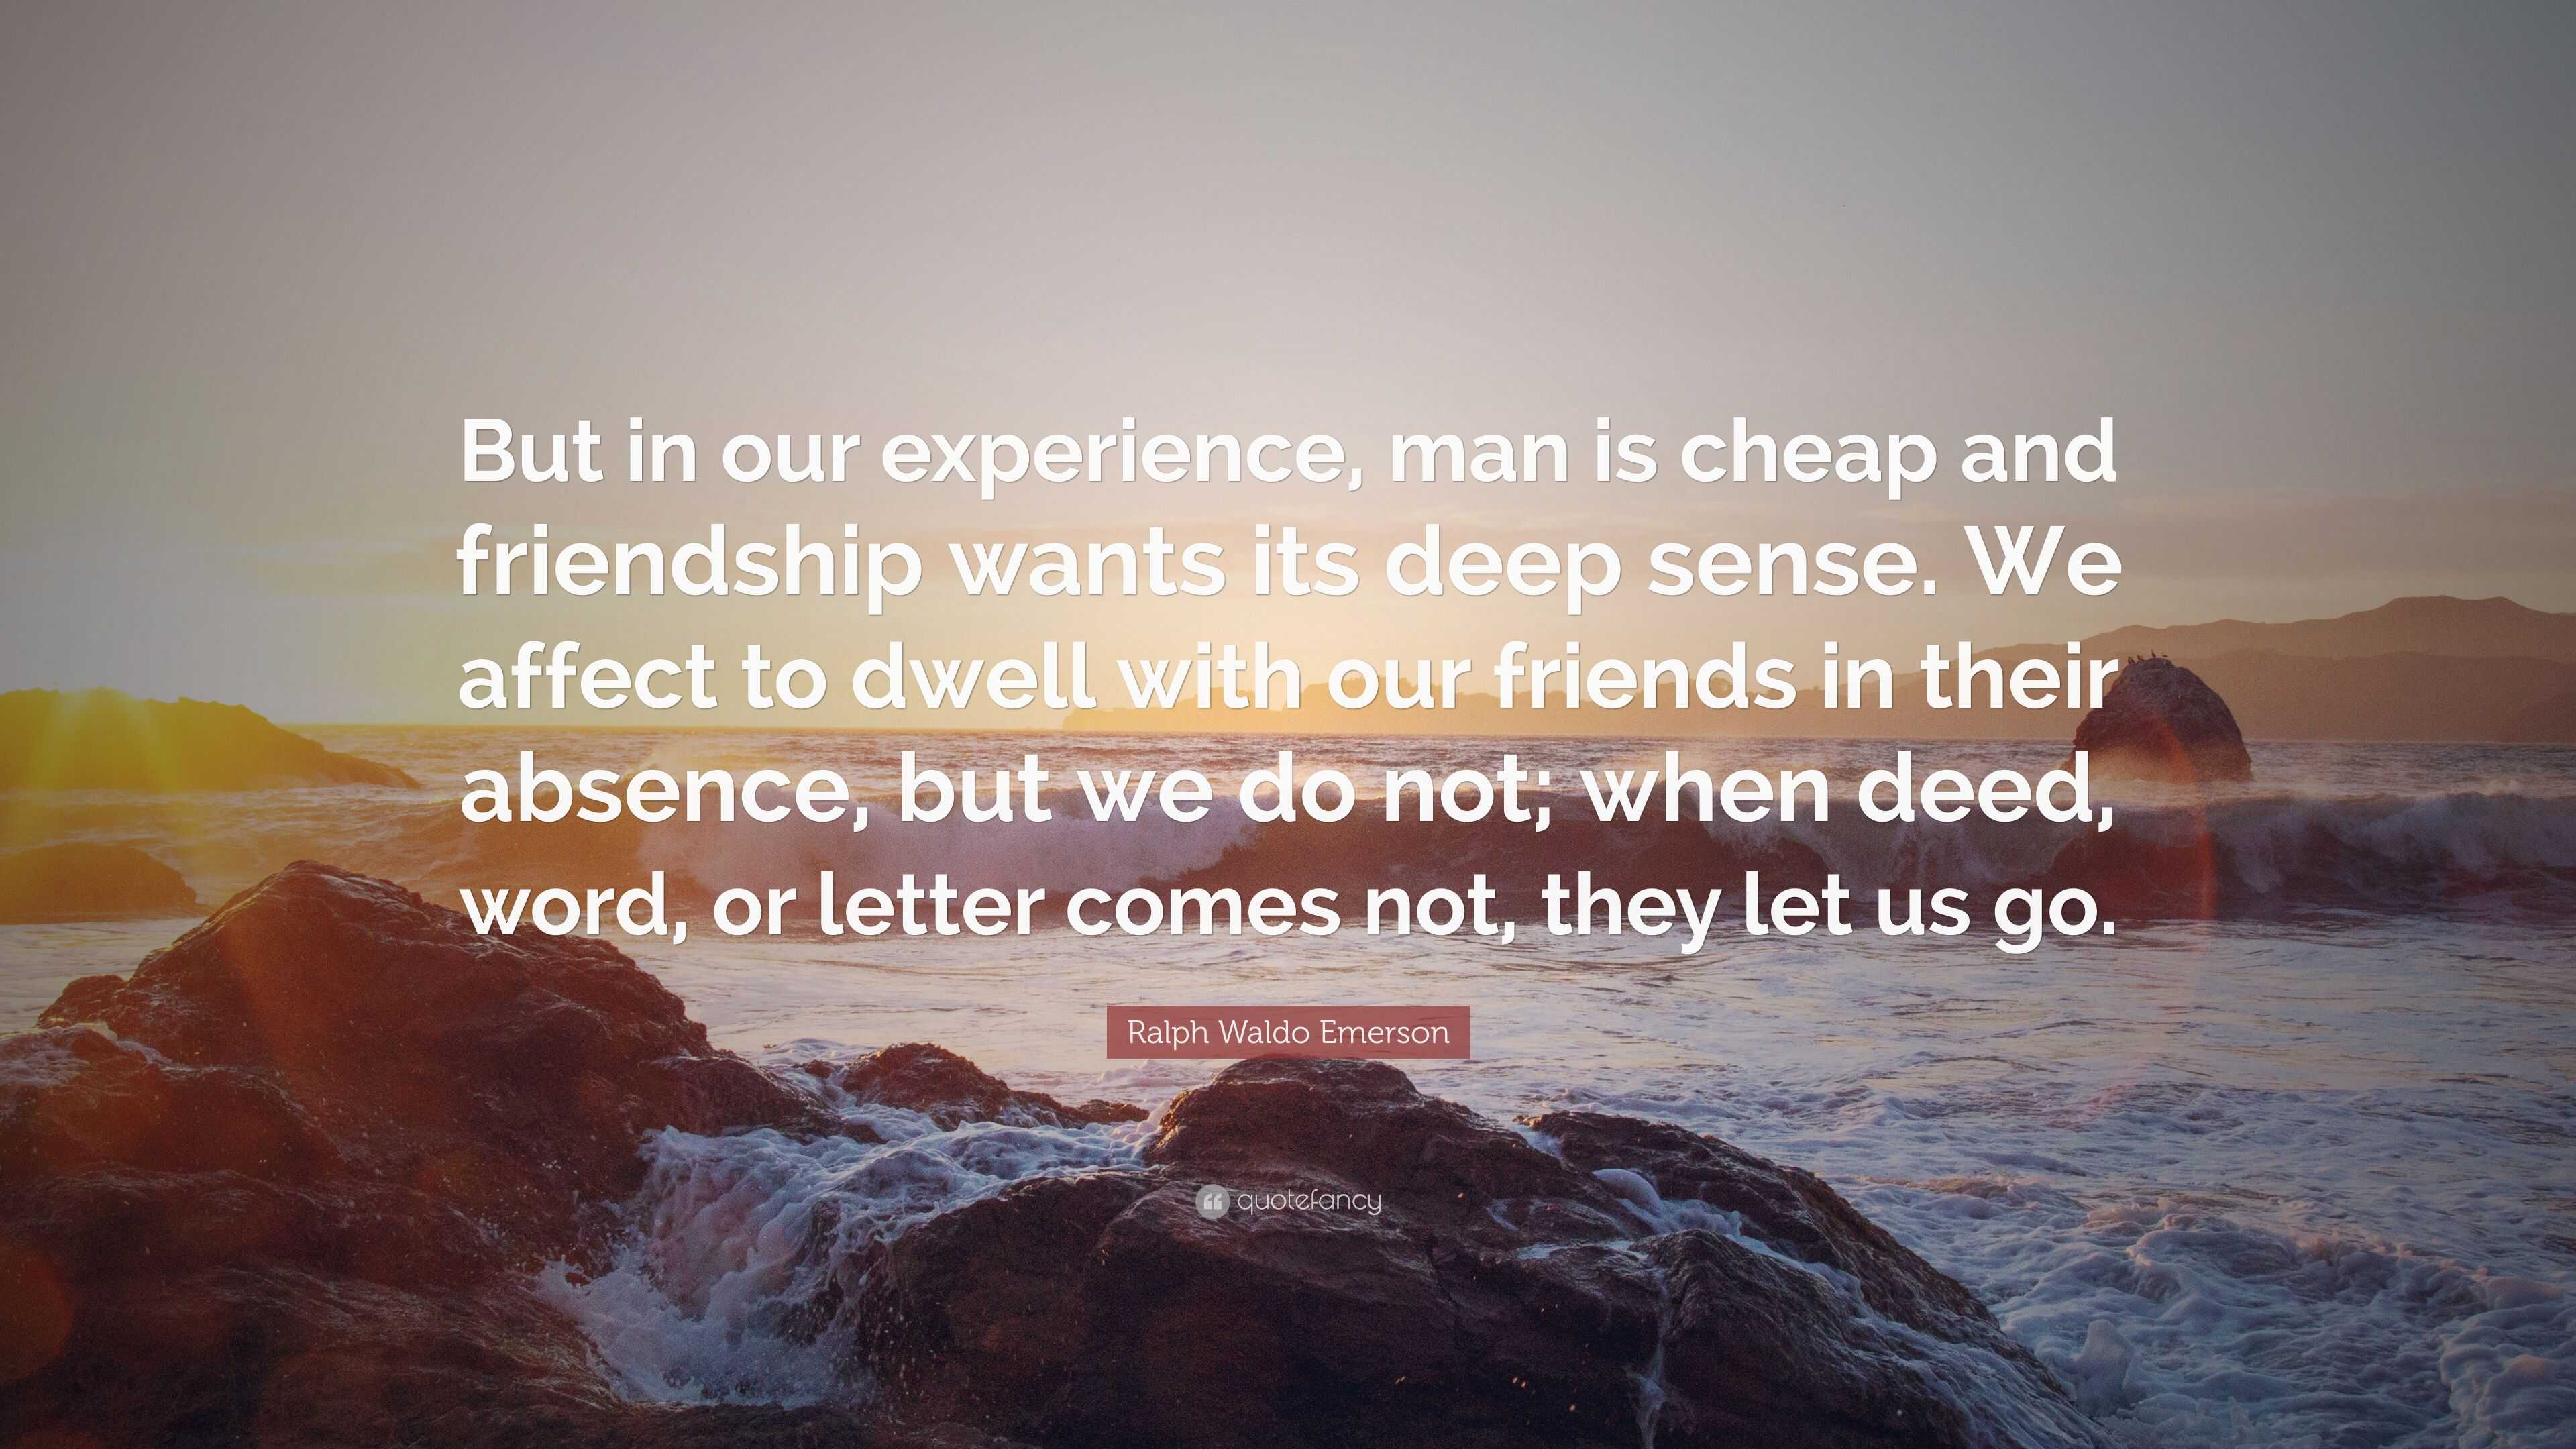 Ralph Waldo Emerson Quote: “But in our experience, man is cheap and